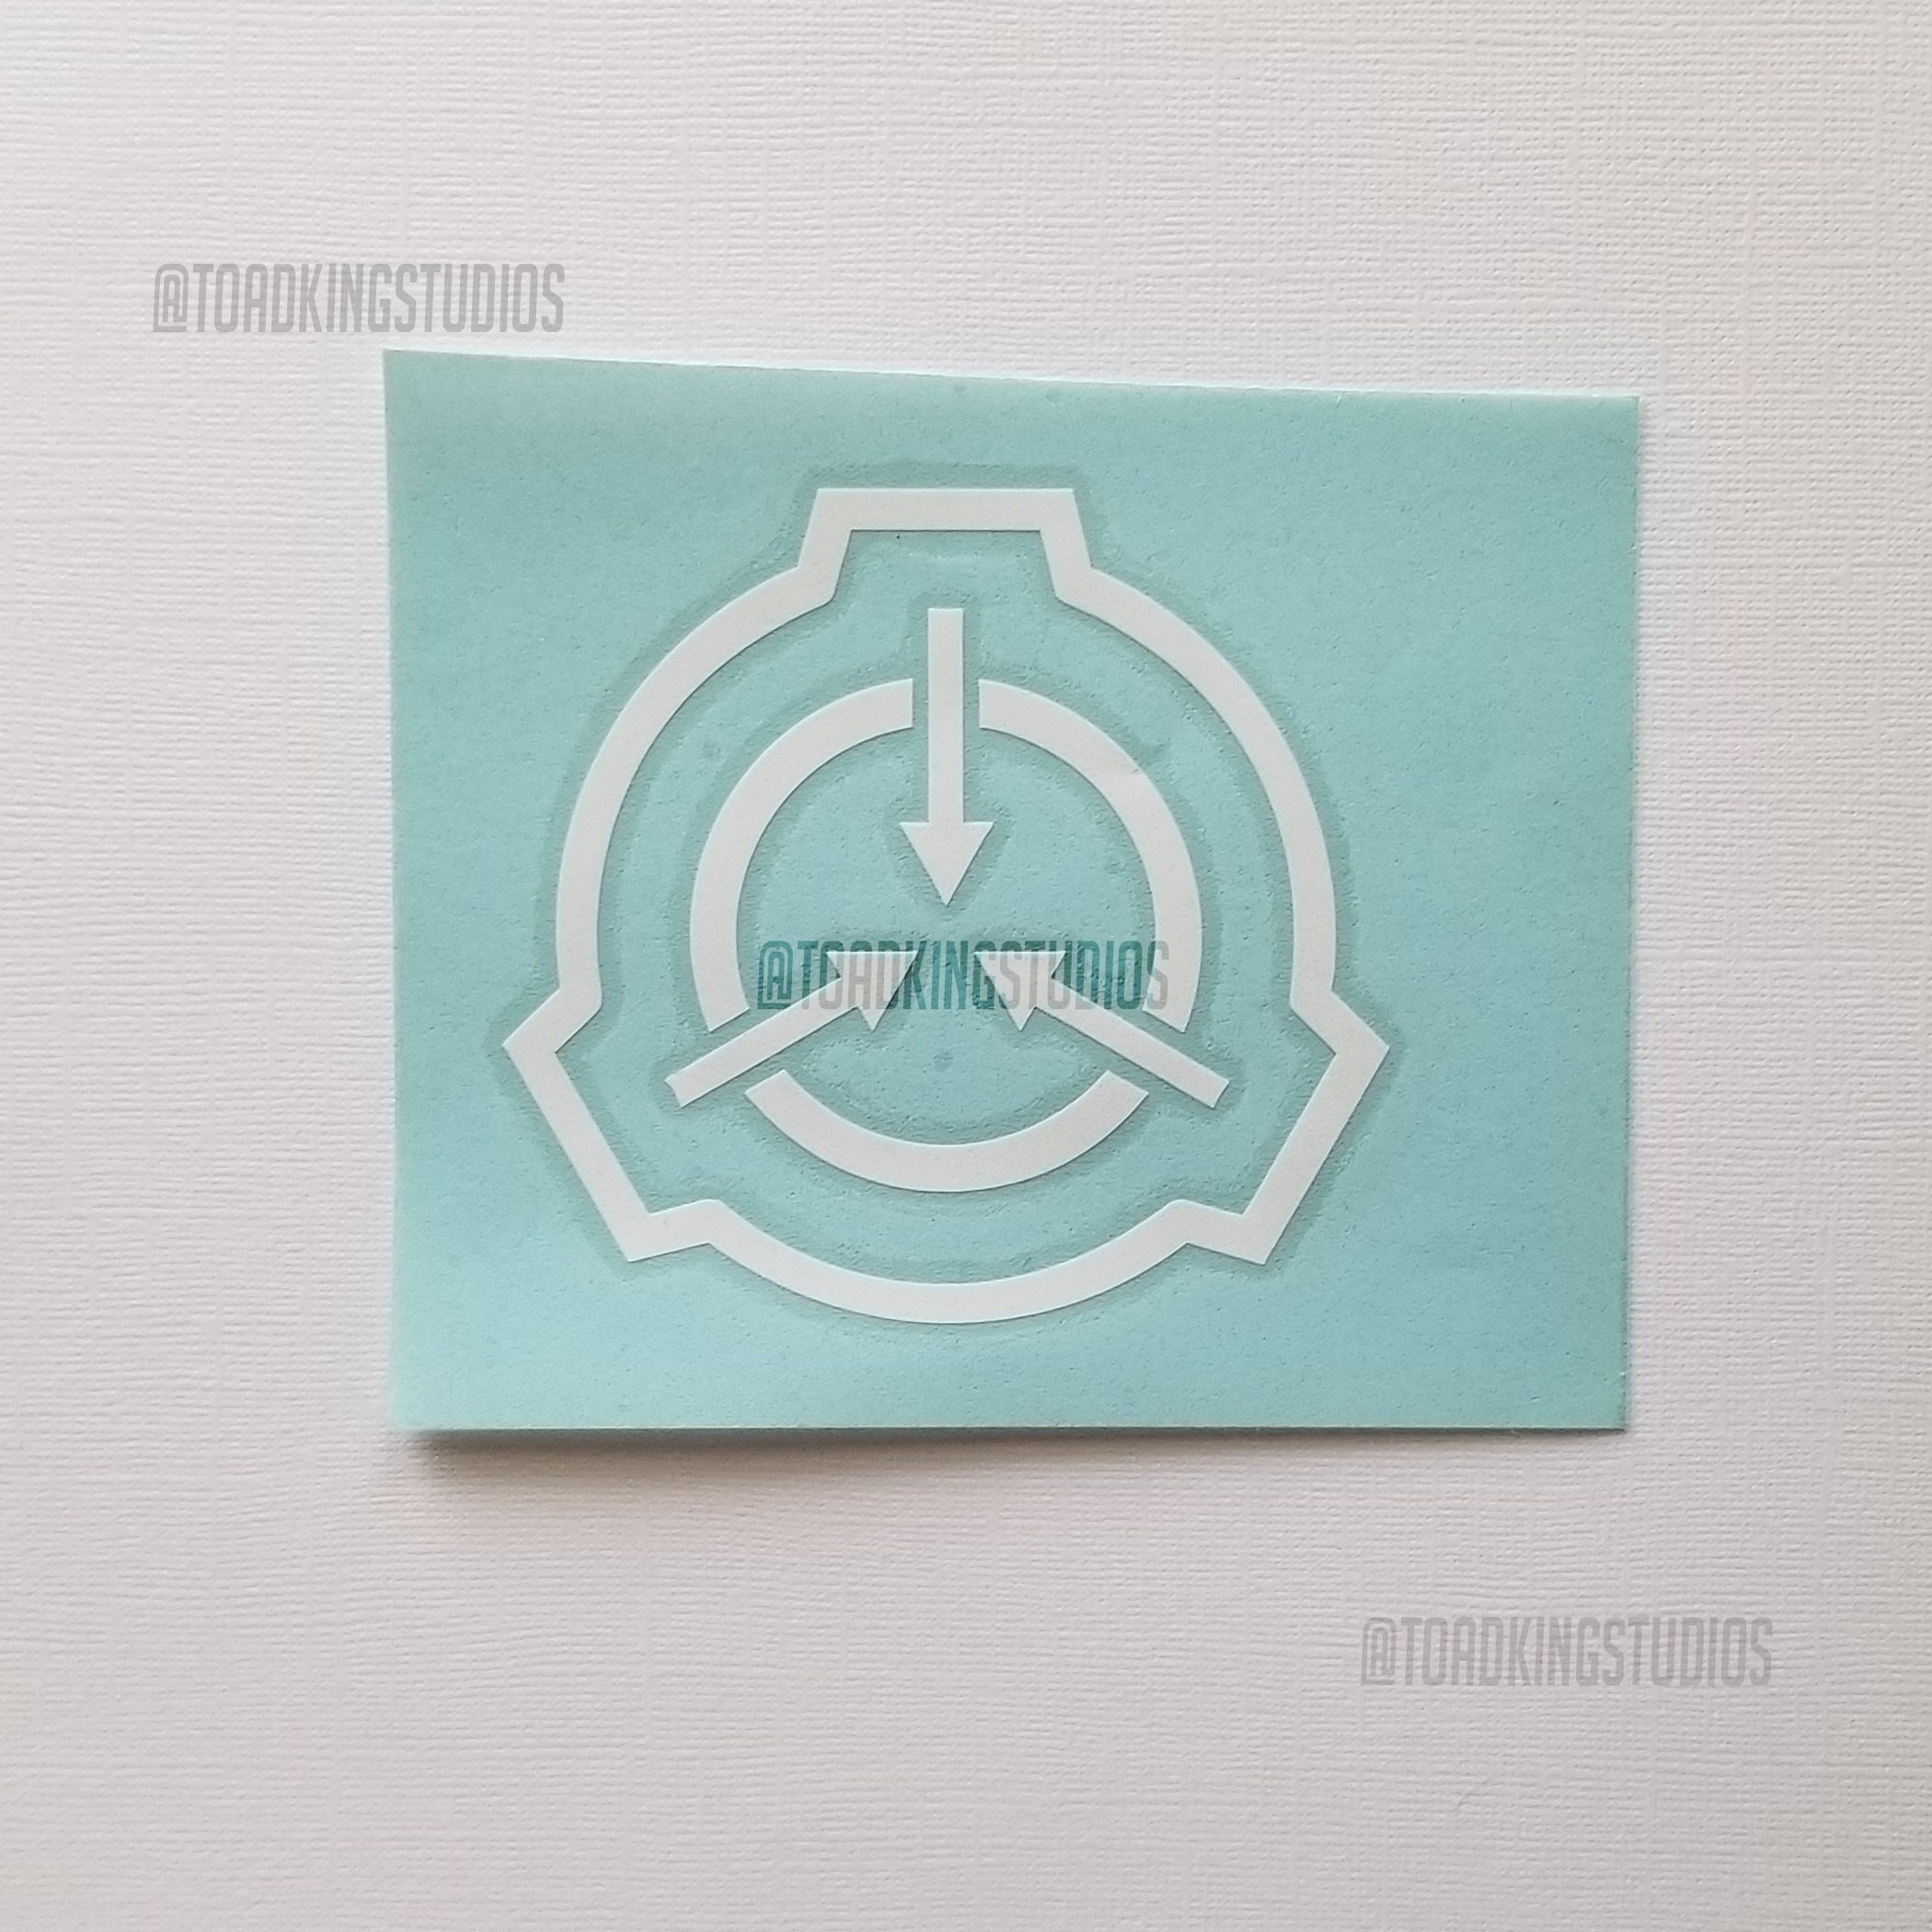 SCP Circle Logo Die Cut Decal Sticker With or Without Words 